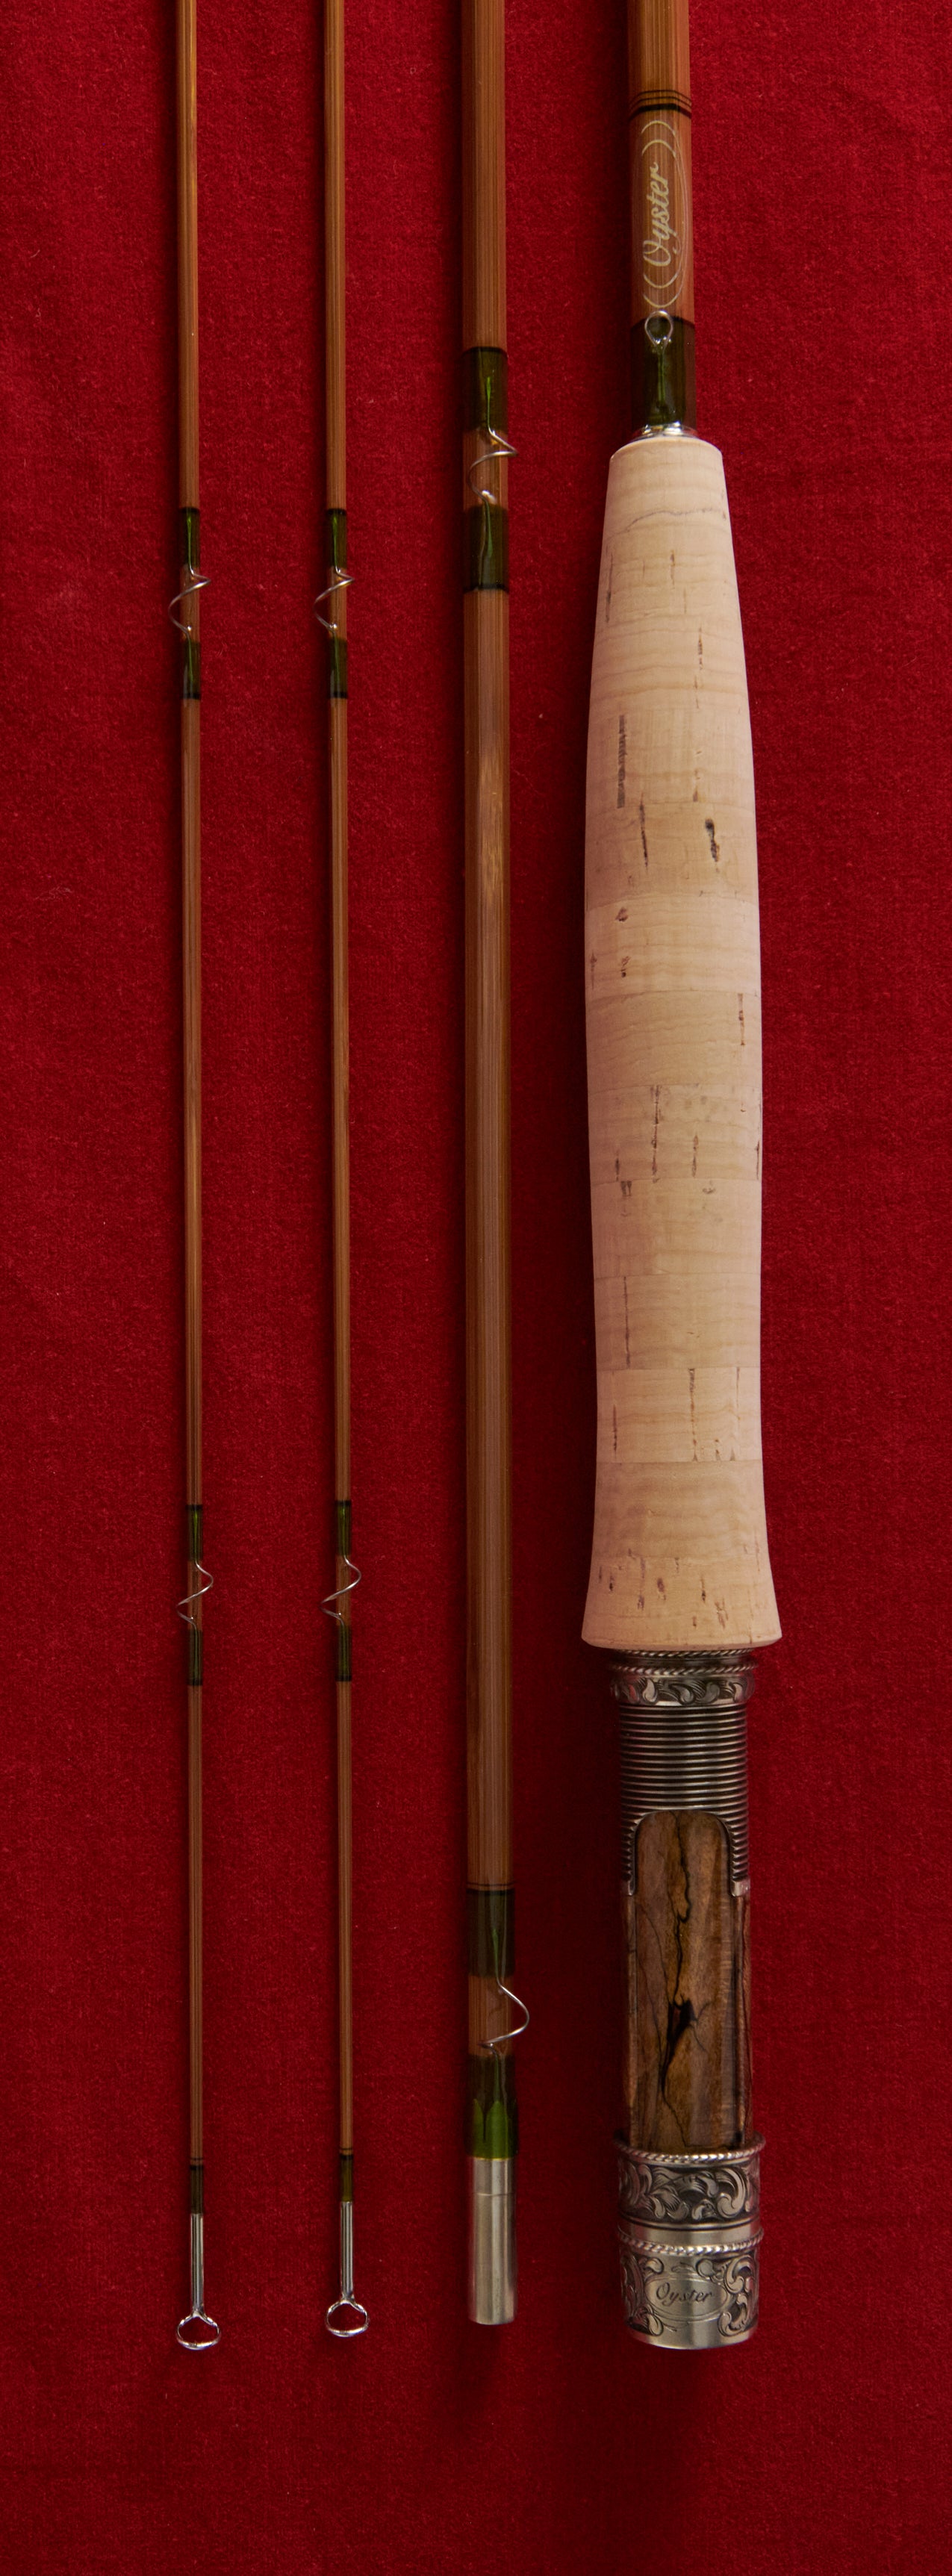 8' 5wt Oyster Bamboo Fly Rod Master Series